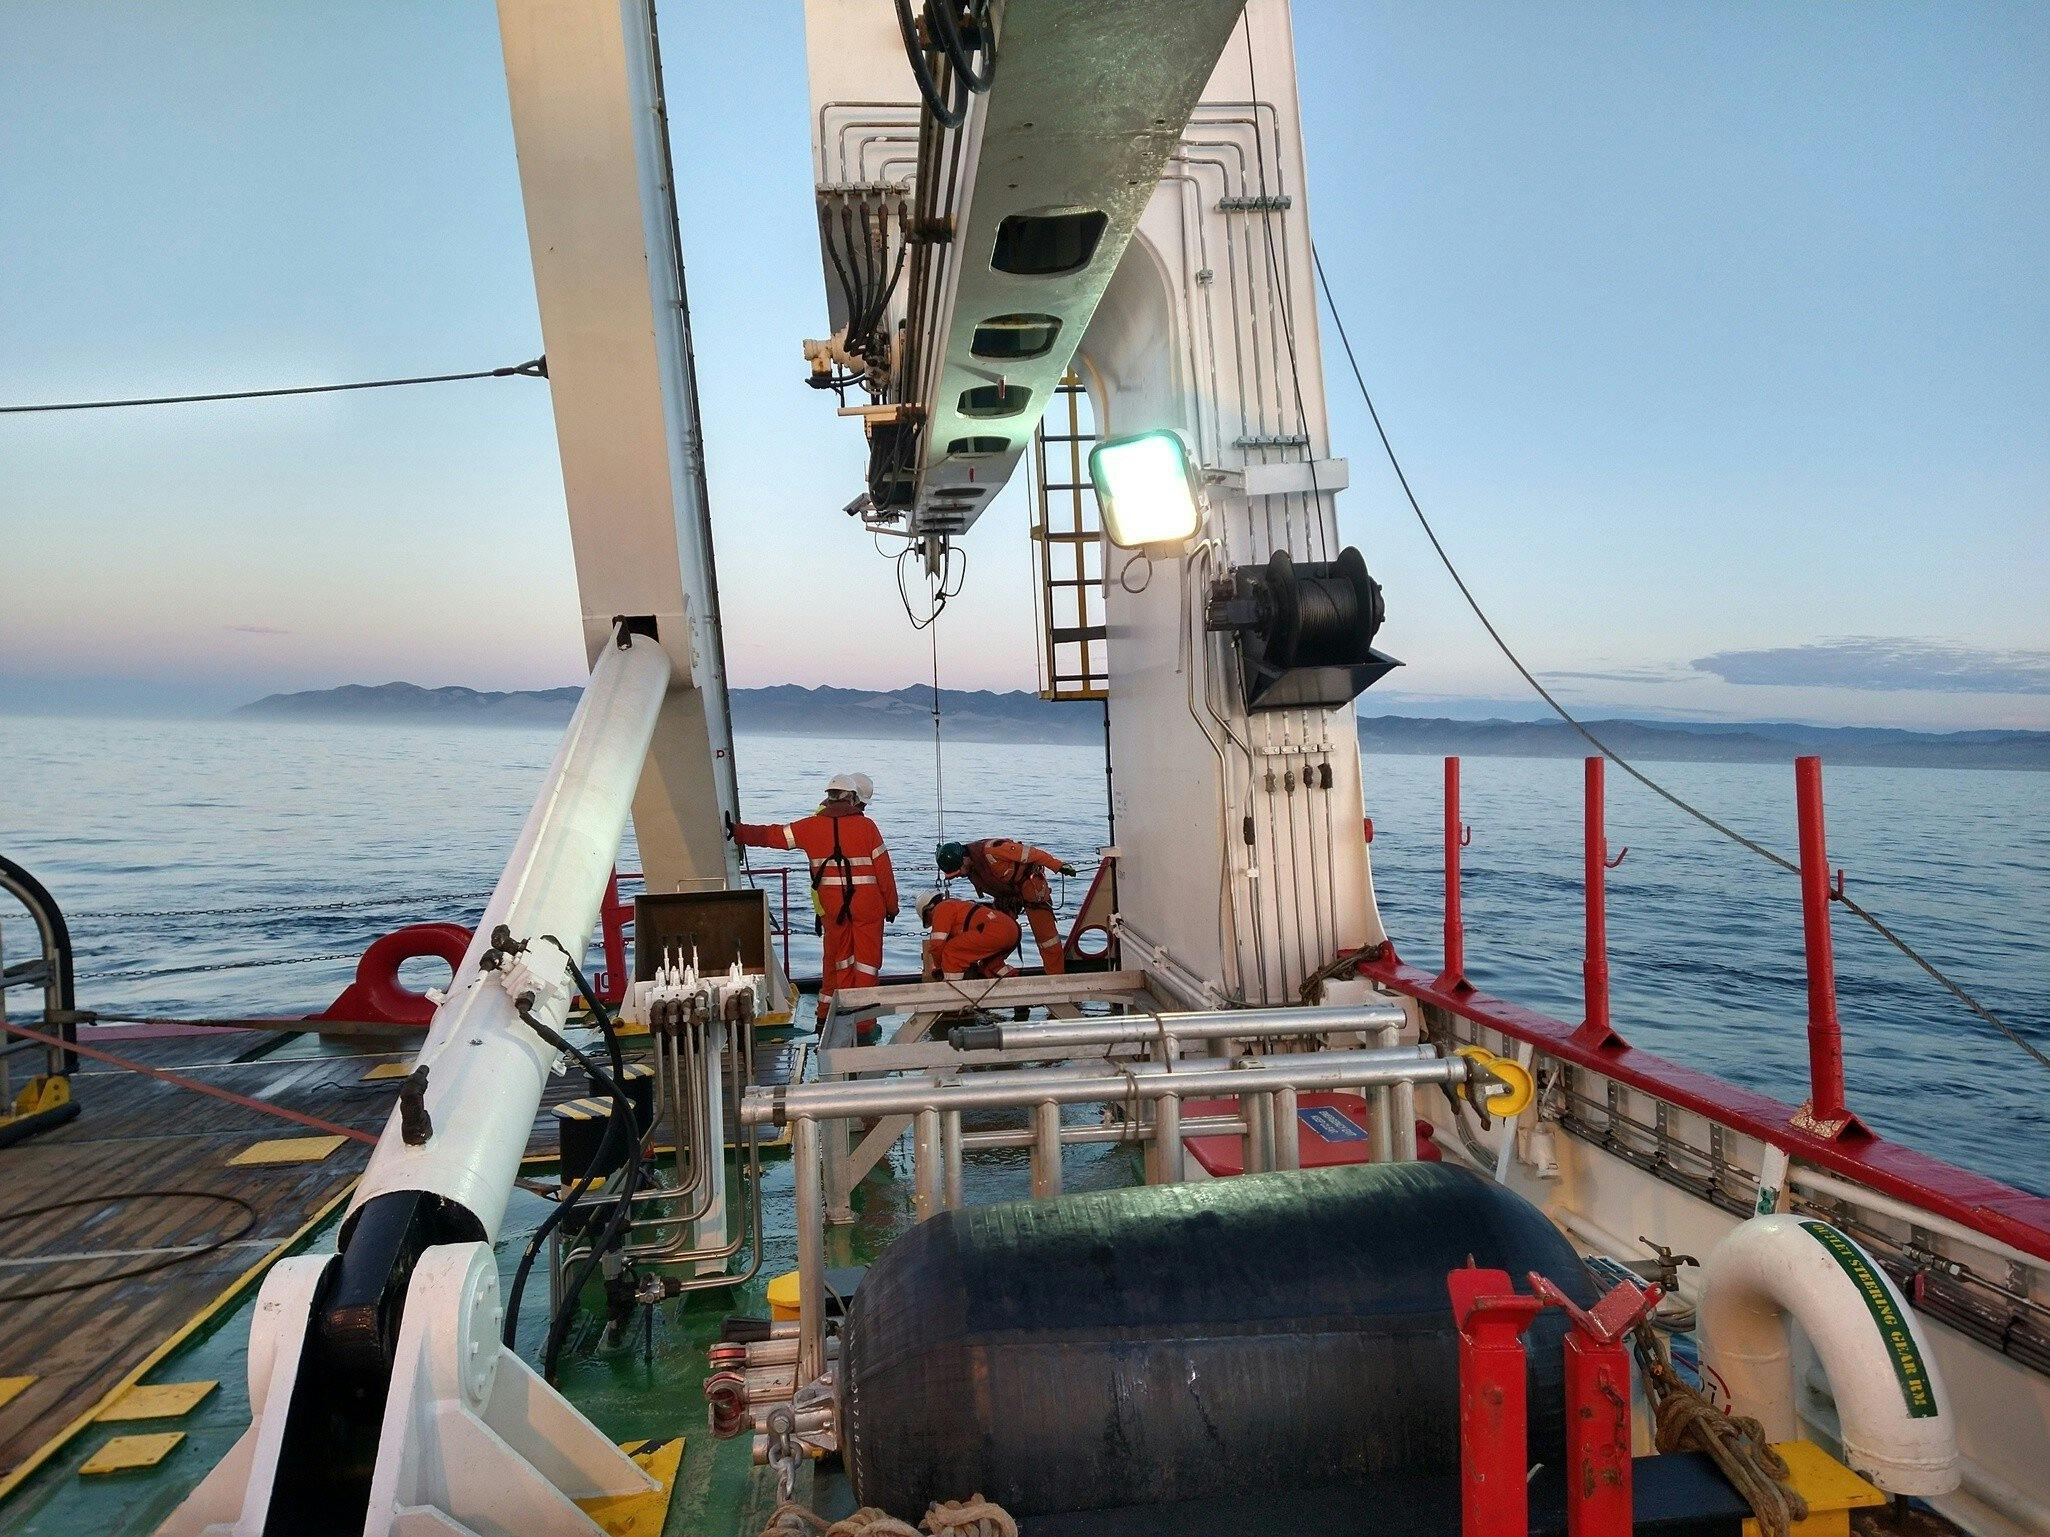 Seabed sampling with van Veen grab off the Fugro Discovery. Geologist is checking the sample quality